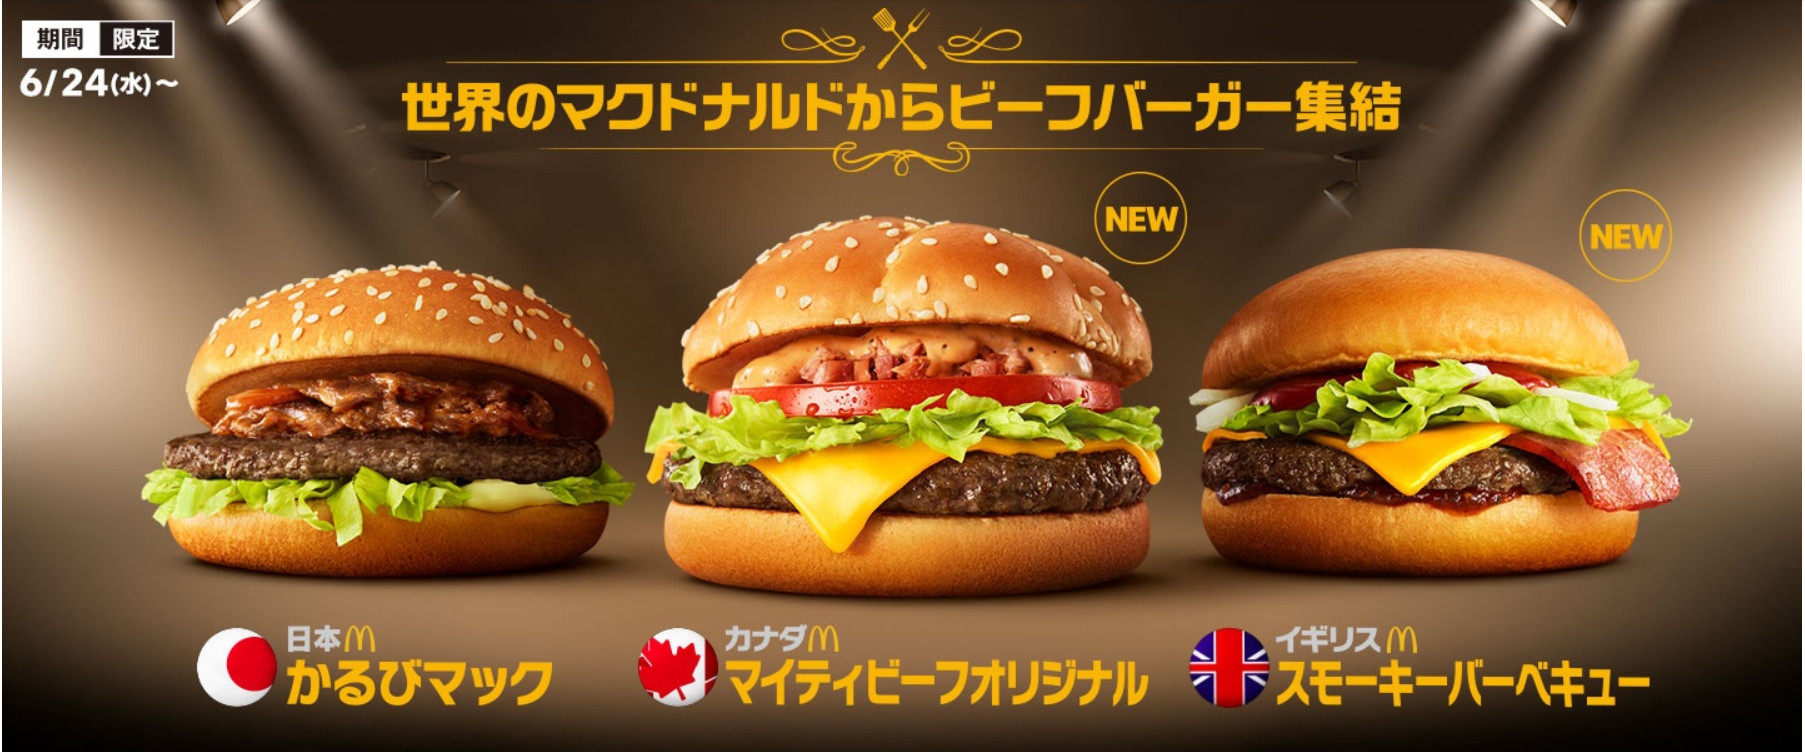 McDonald's Japan starts new campaign featuring burgers from their